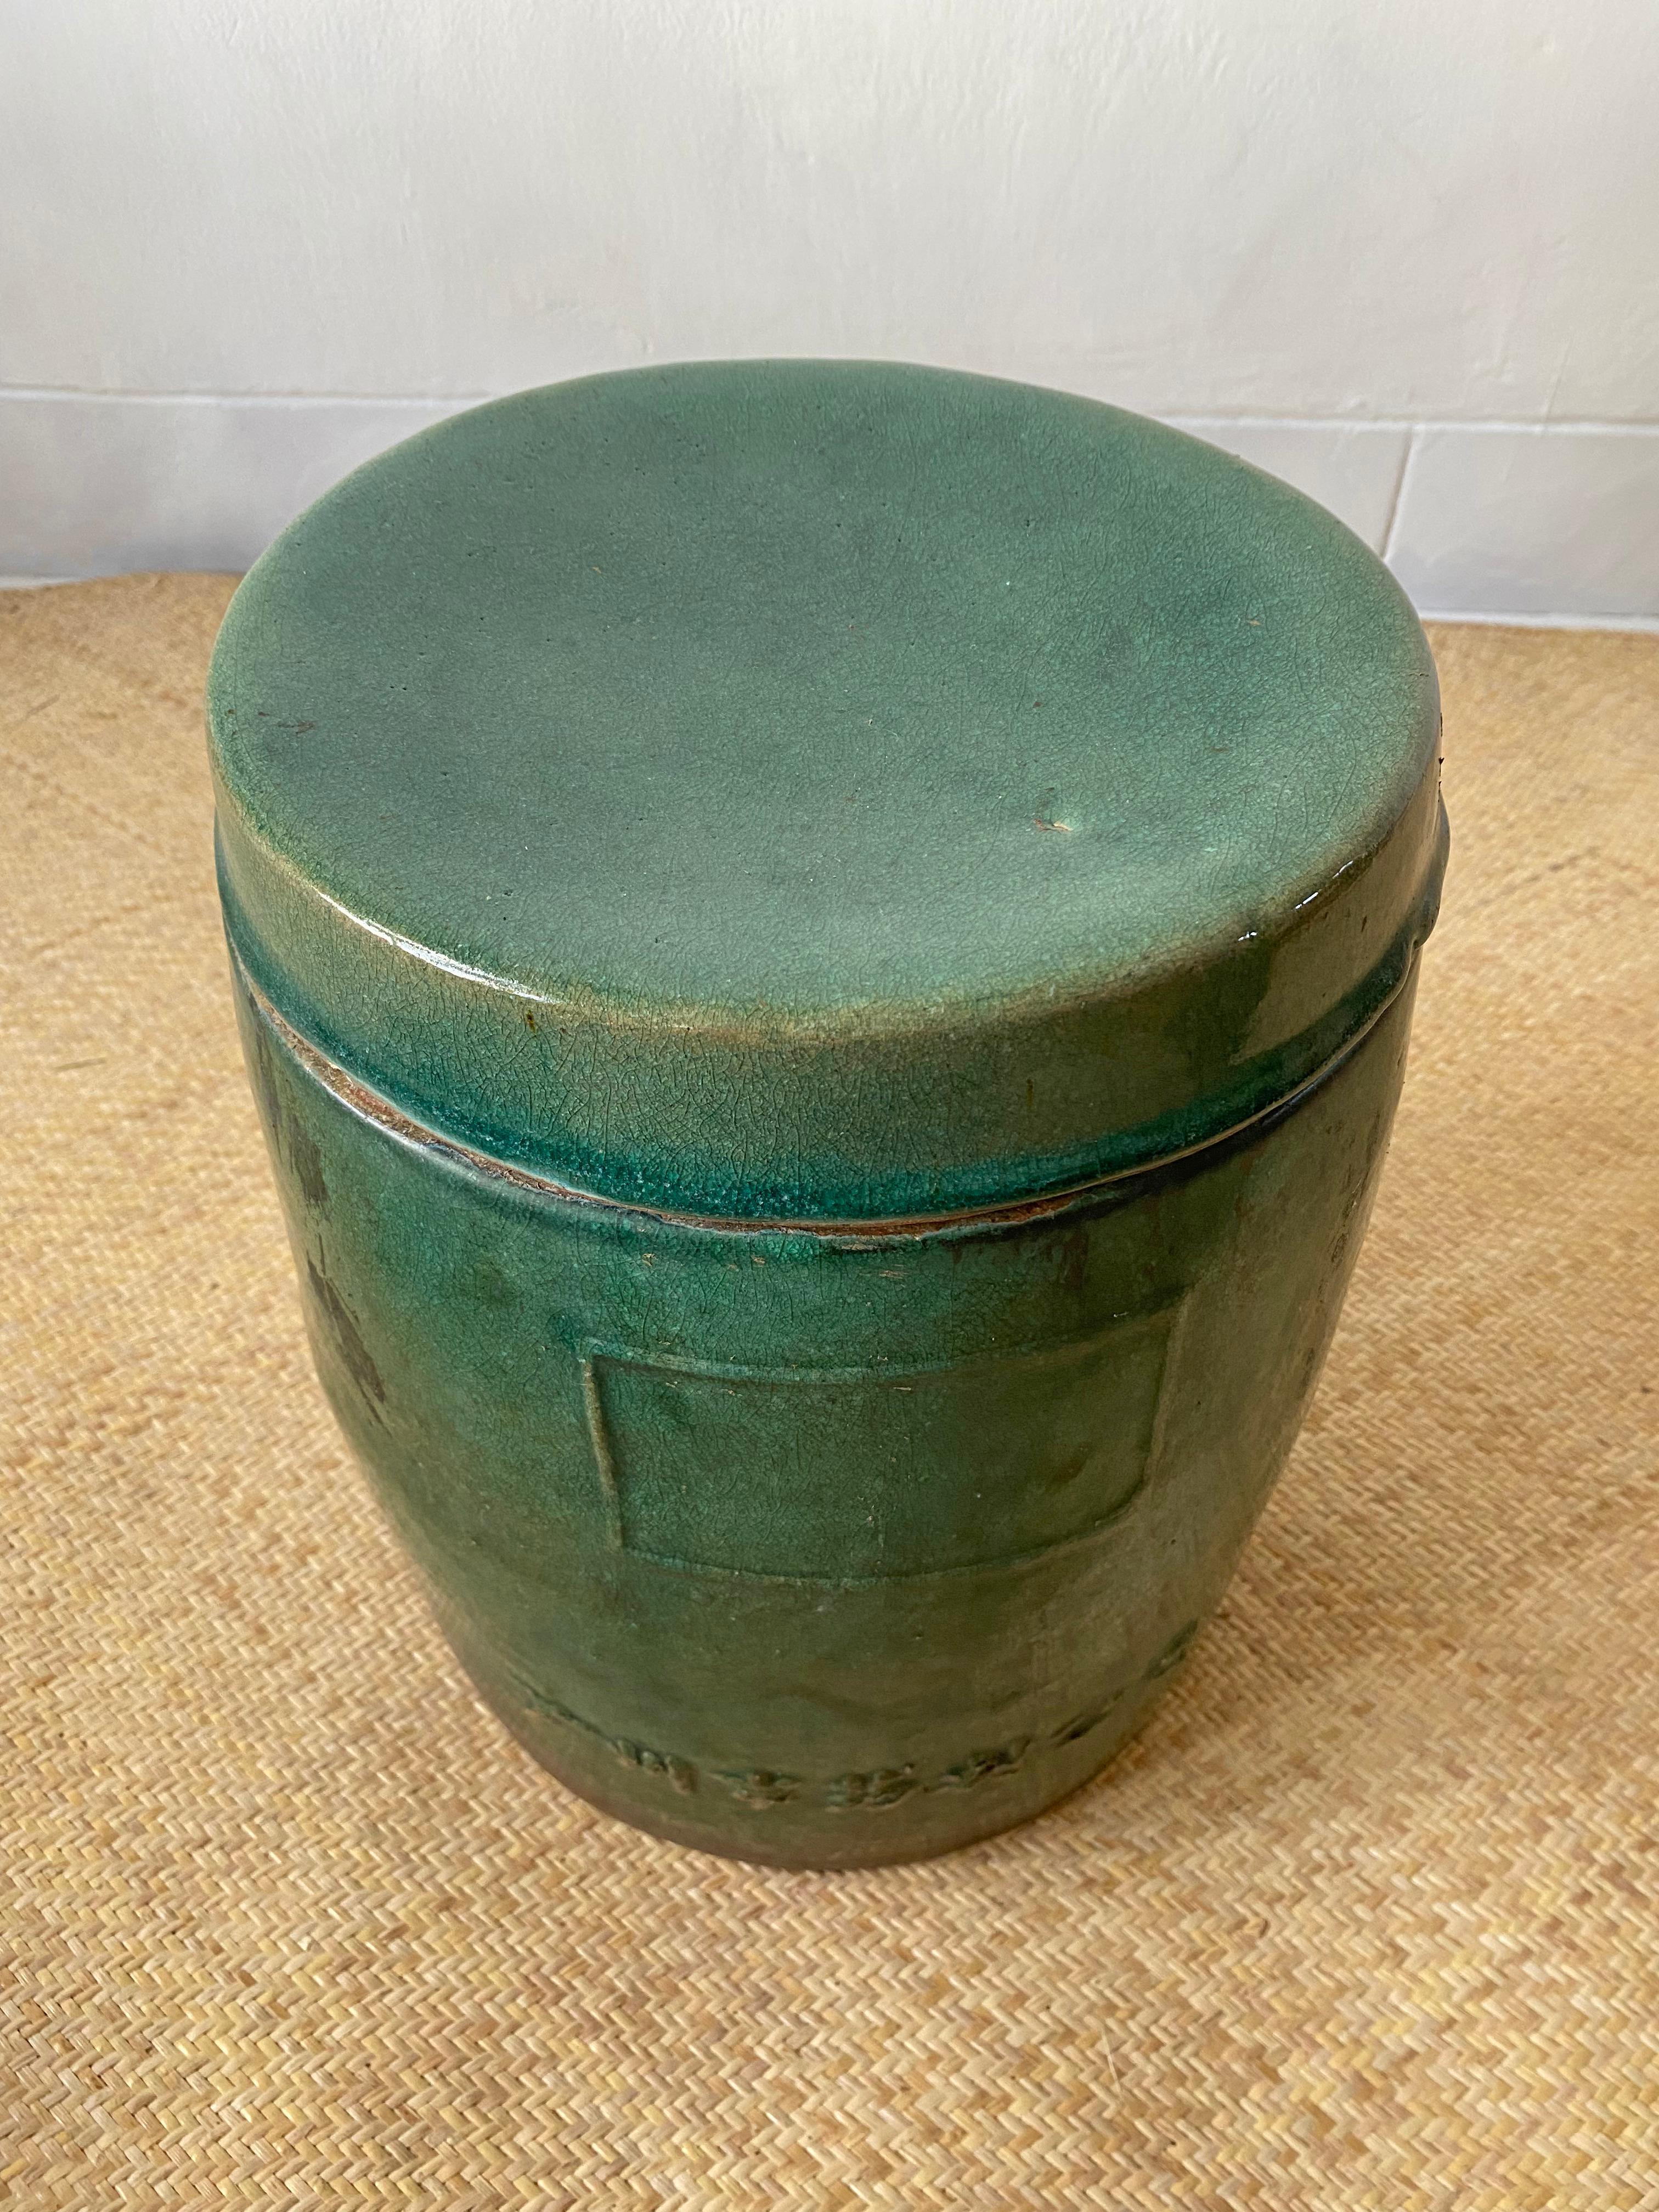 Other Chinese Ceramic Guangzhou Medicine Company 'Apothecary' Jar, Early 20th Century